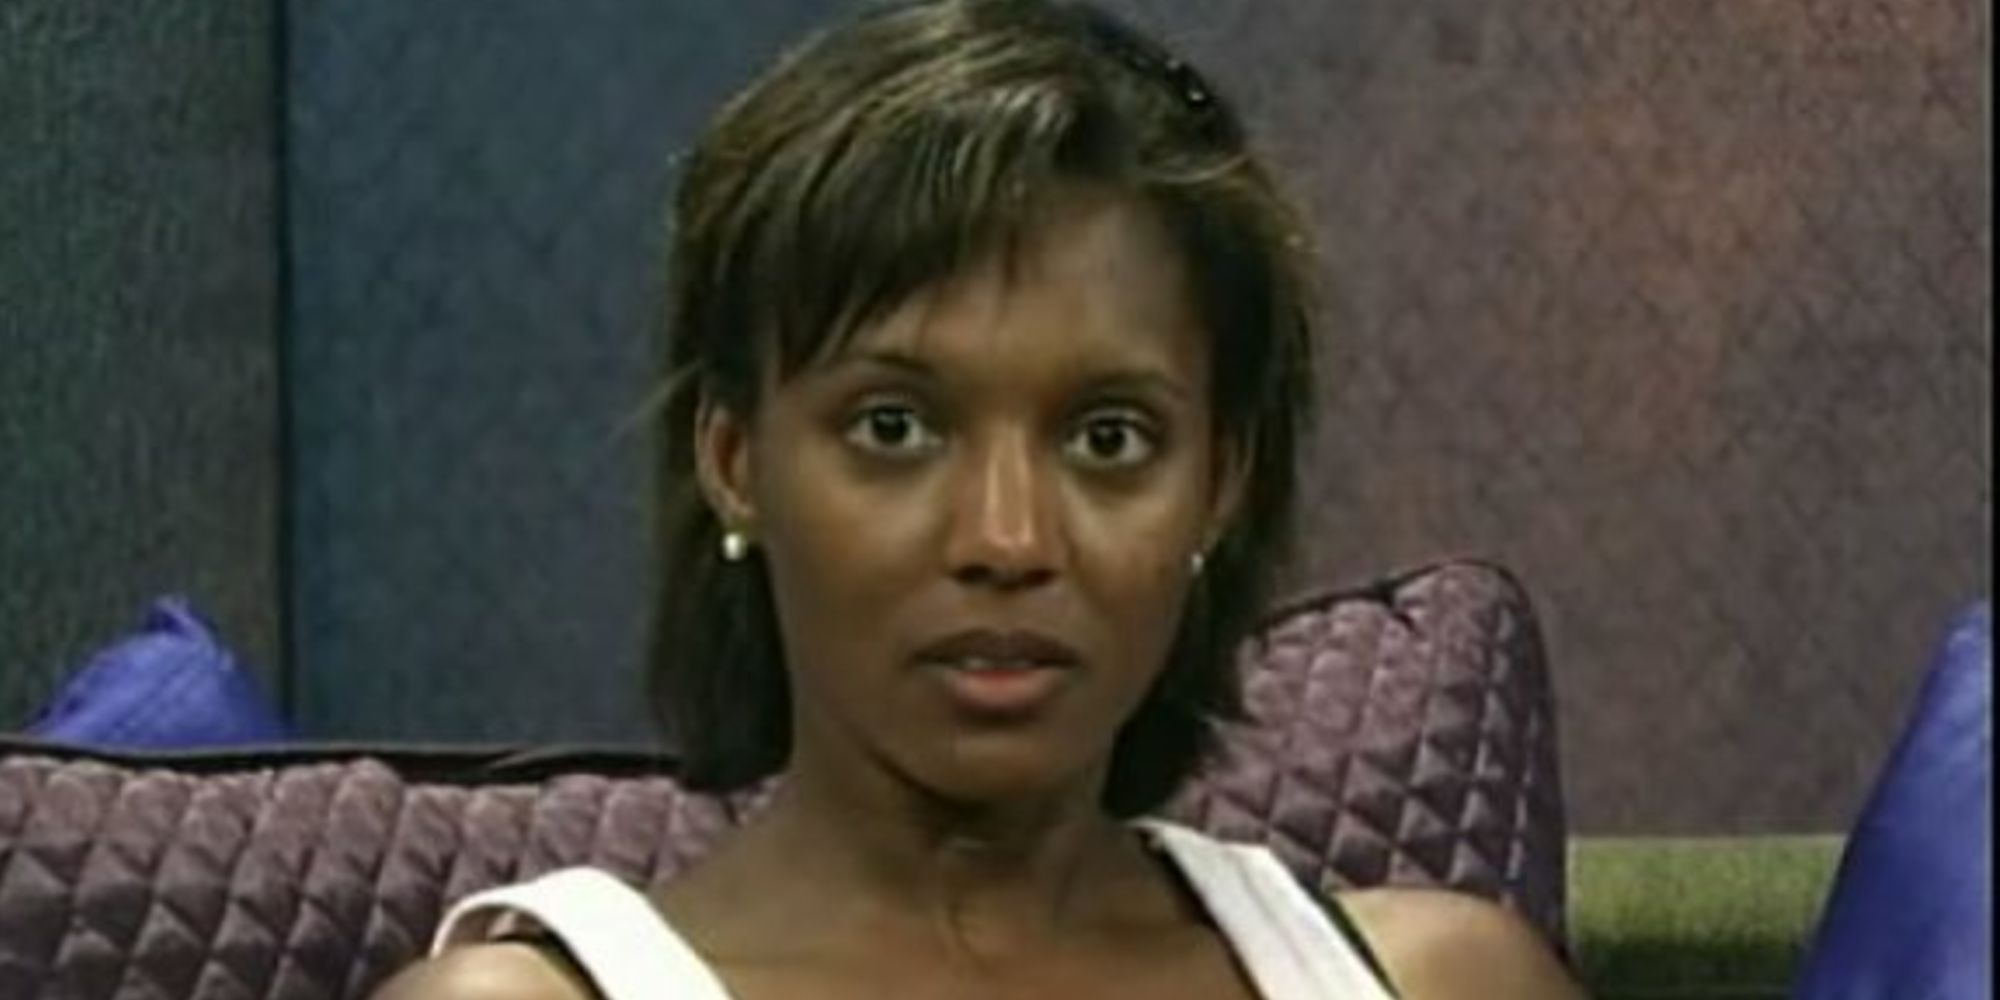 Danielle Reyes looking into the camera in Big Brother season 3